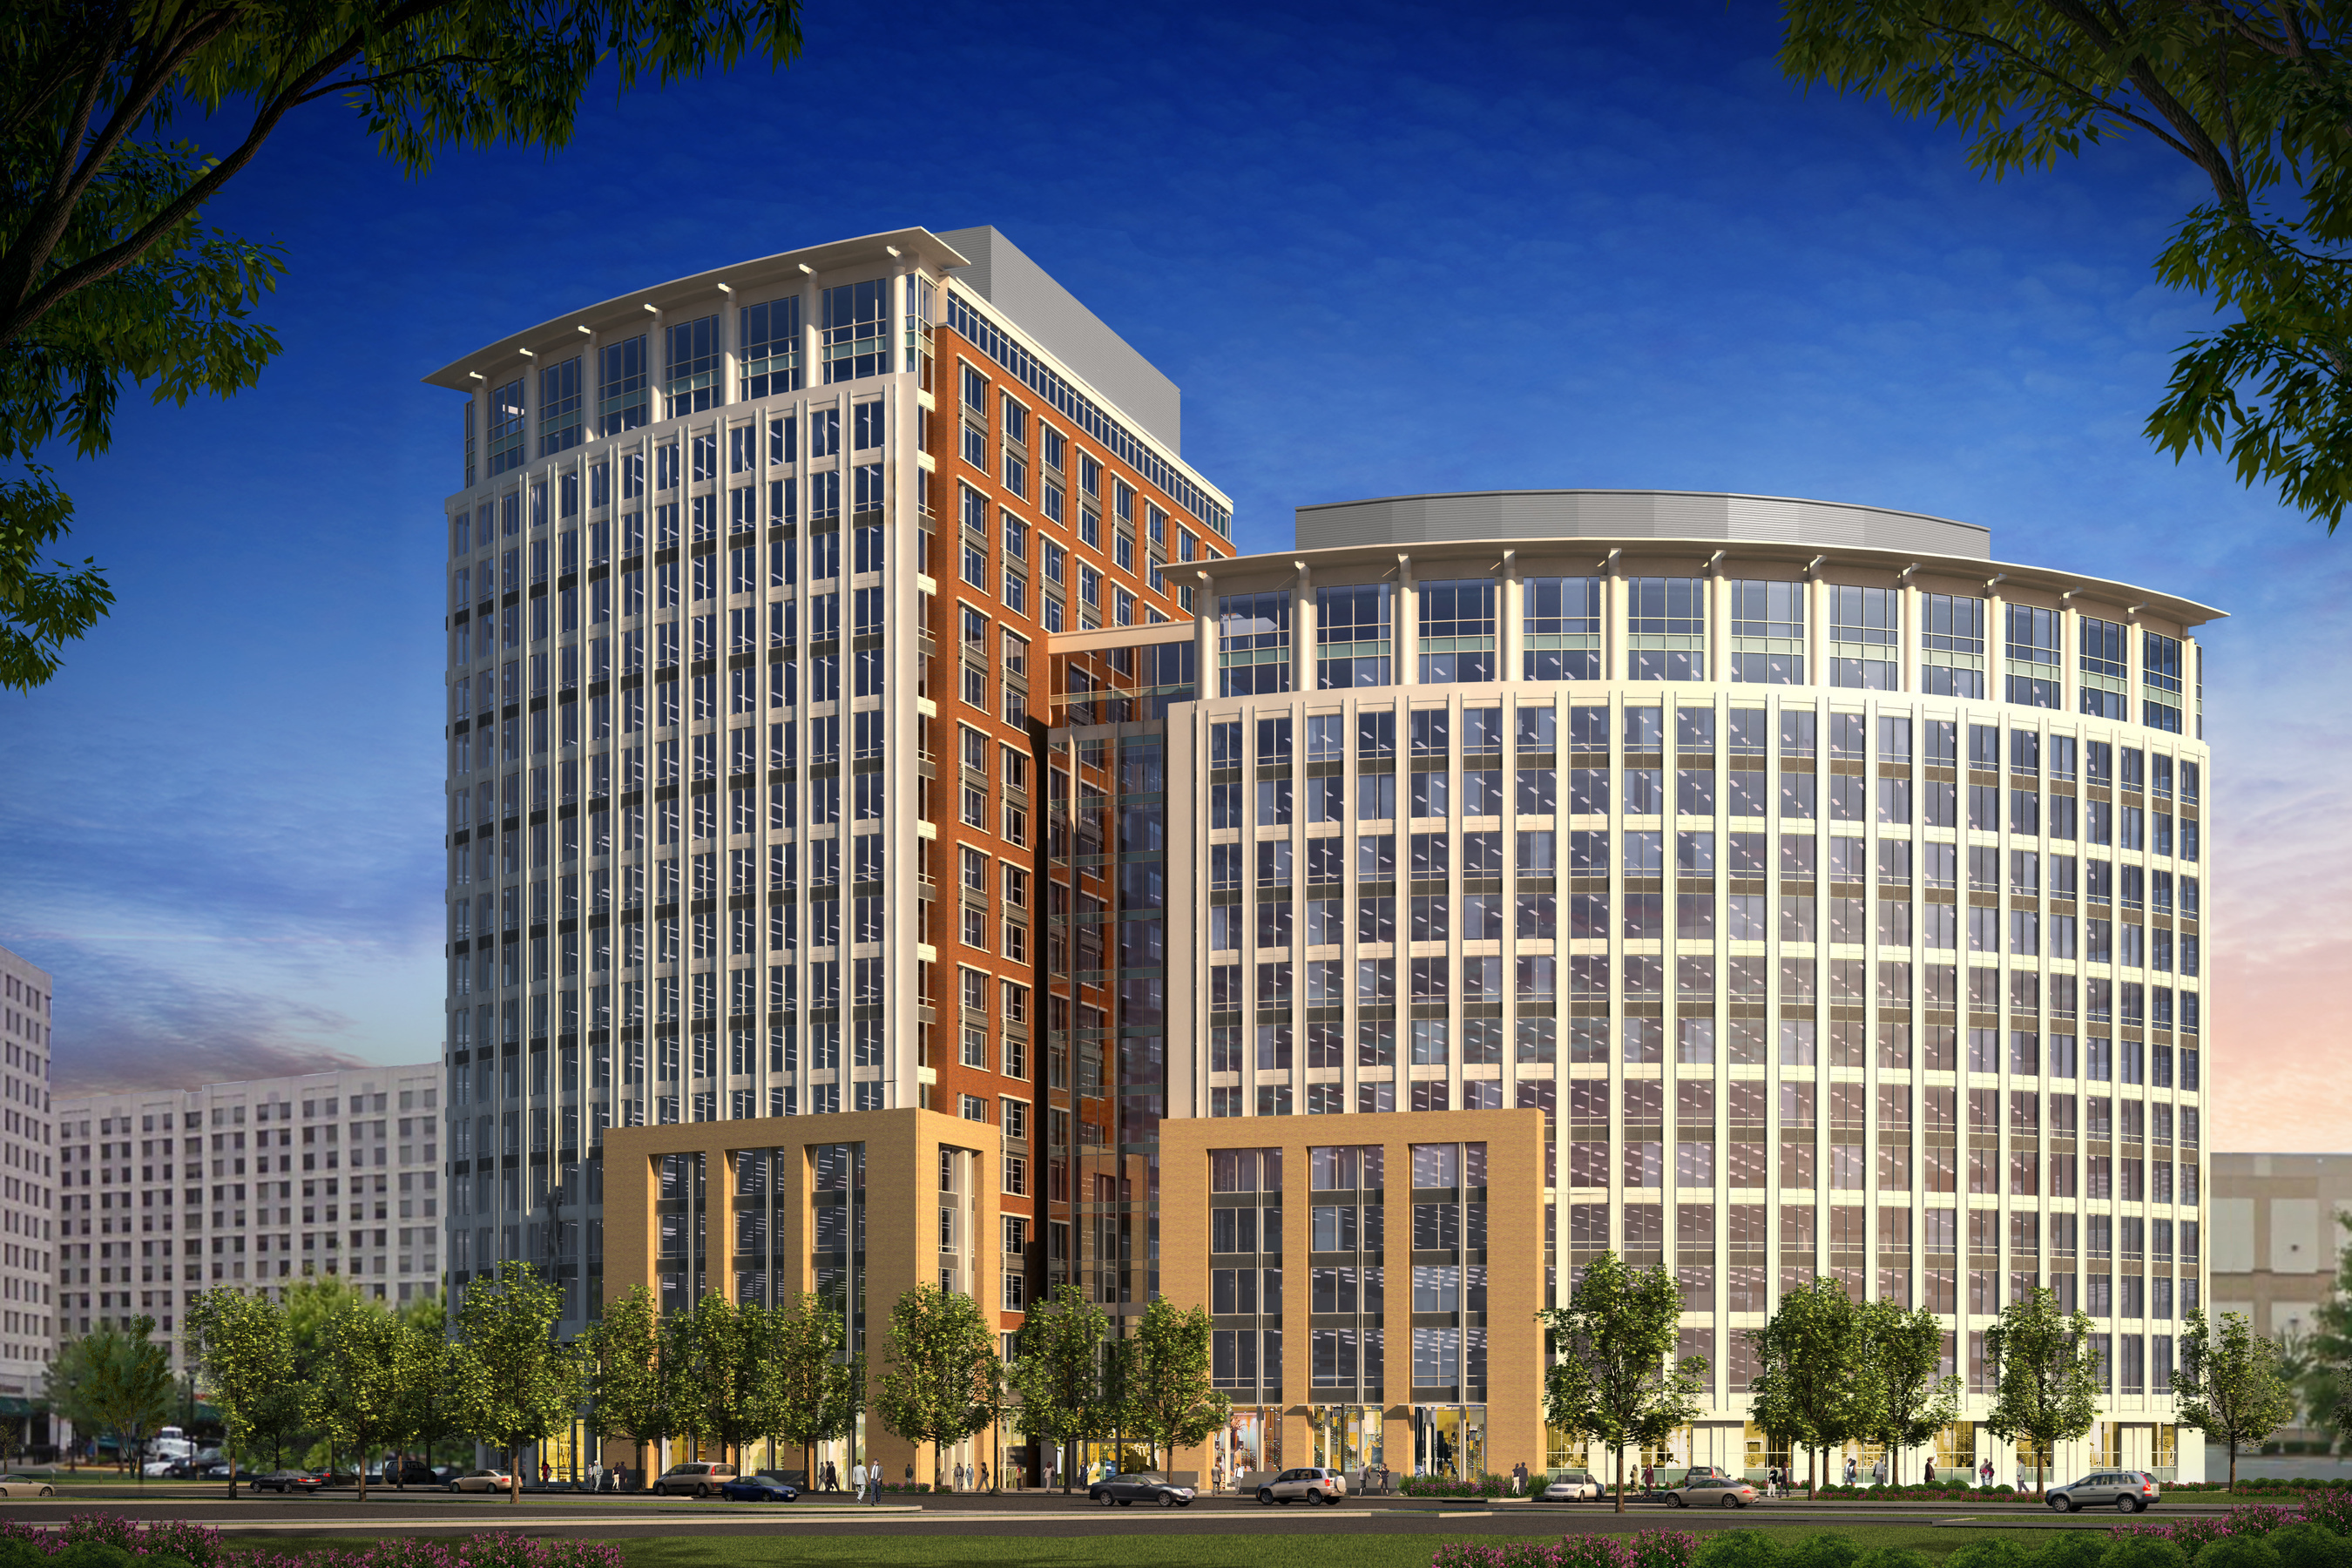 USAA Real Estate Company Develops New Headquarters for National Science Foundation in Alexandria, VA (PRNewsFoto/USAA Real Estate Company)